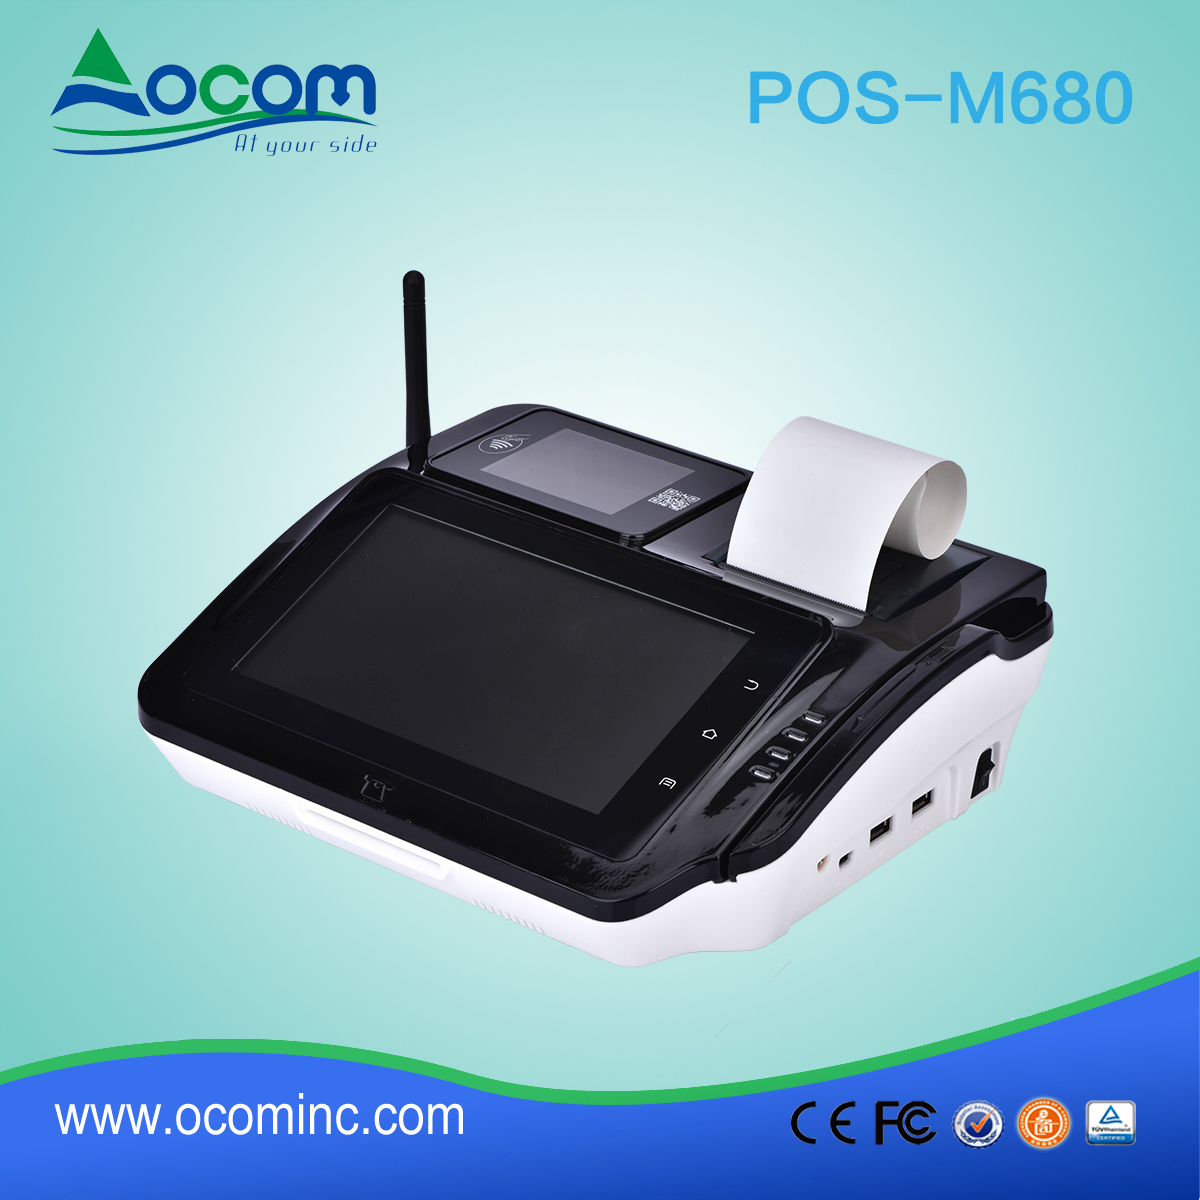 POS-M680 7inch Android POS terminal with Thermal Printer and Scanner